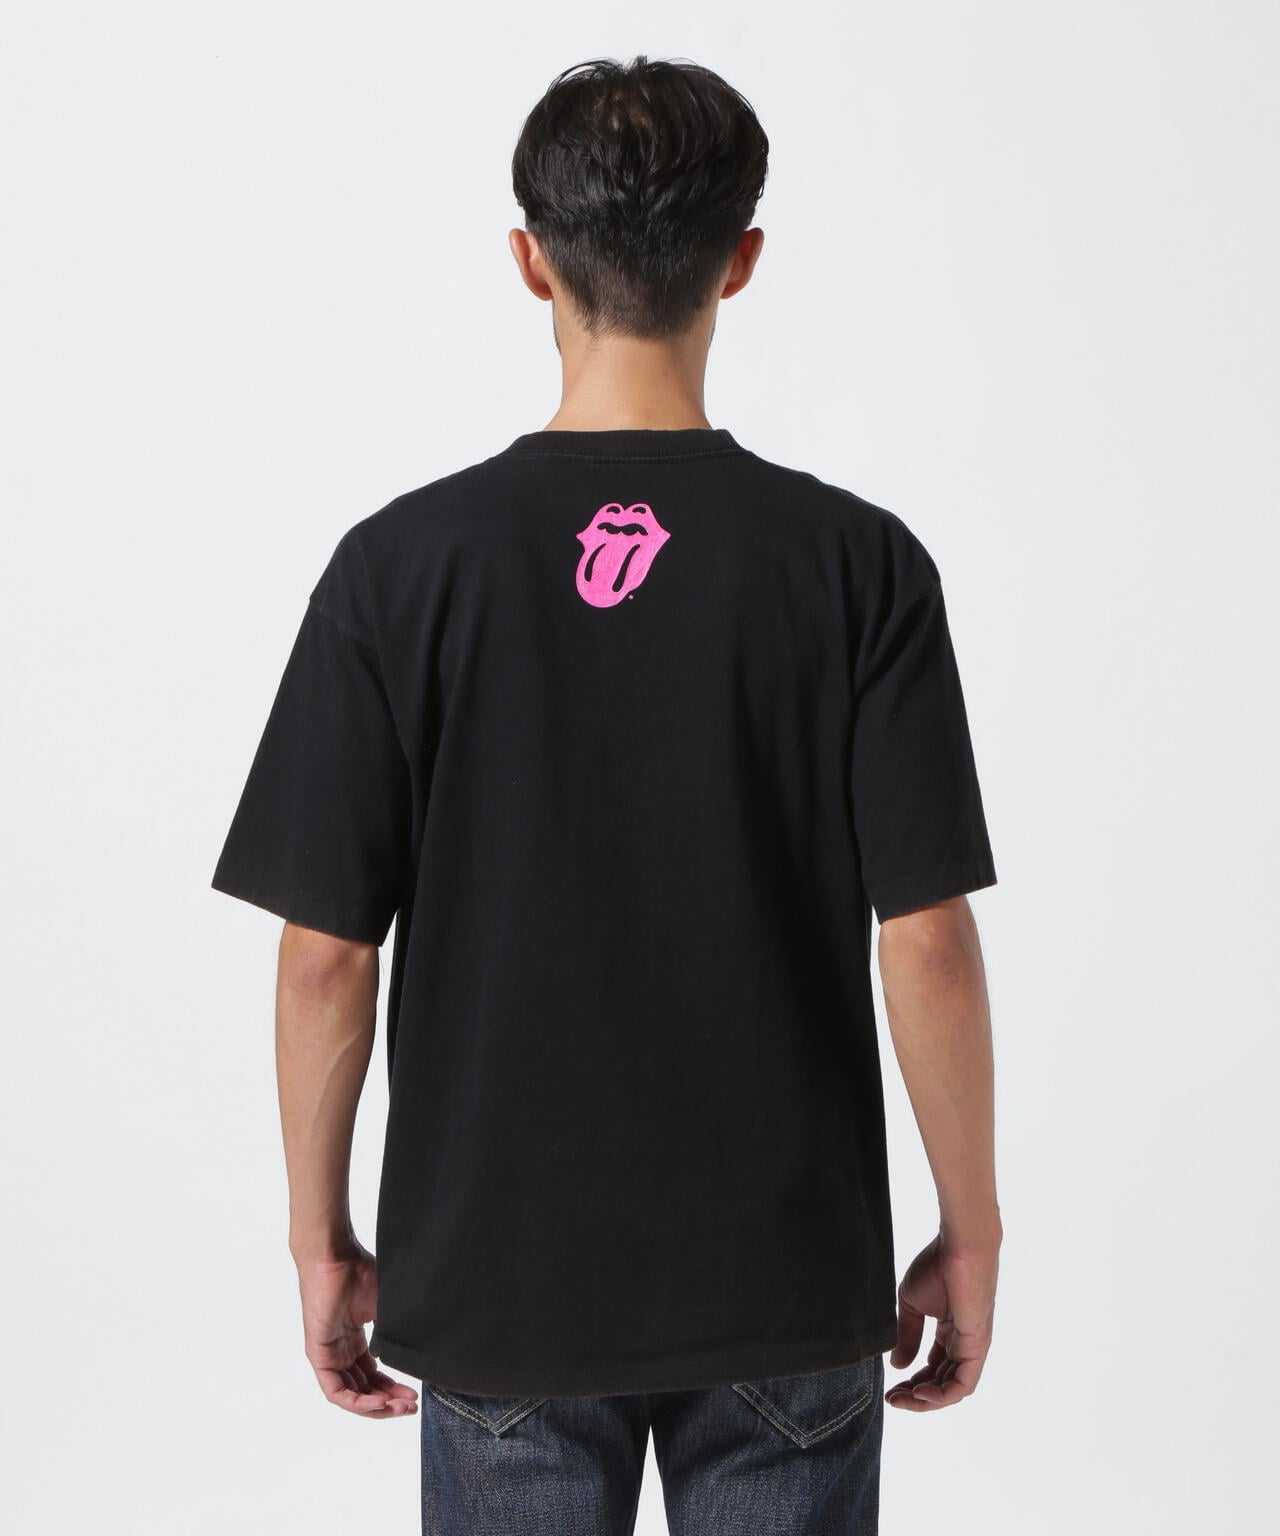 SURT(サート)THE ROLLING STONES LETTER No1 Tee | B'2nd ( ビー